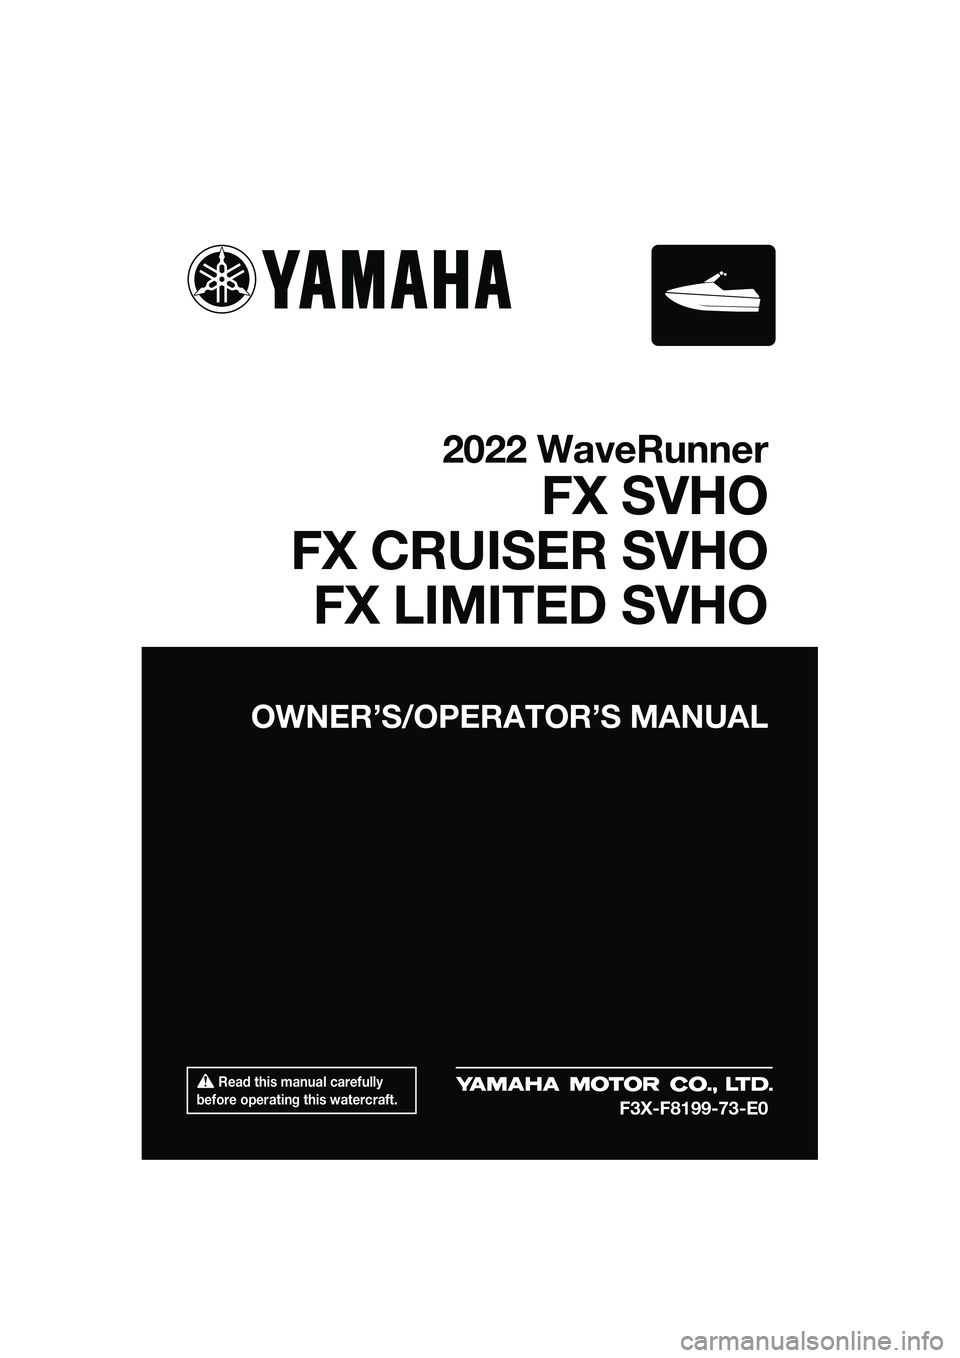 YAMAHA FX SVHO 2022  Owners Manual  Read this manual carefully 
before operating this watercraft.
OWNER’S/OPERAT OR’S MANUAL
2022 WaveRunner
FX SVHO
FX CRUISER SVHO FX LIMITED SVHO
F3X-F8199-73-E0
UF3X73E0.book  Page 1  Wednesday, 